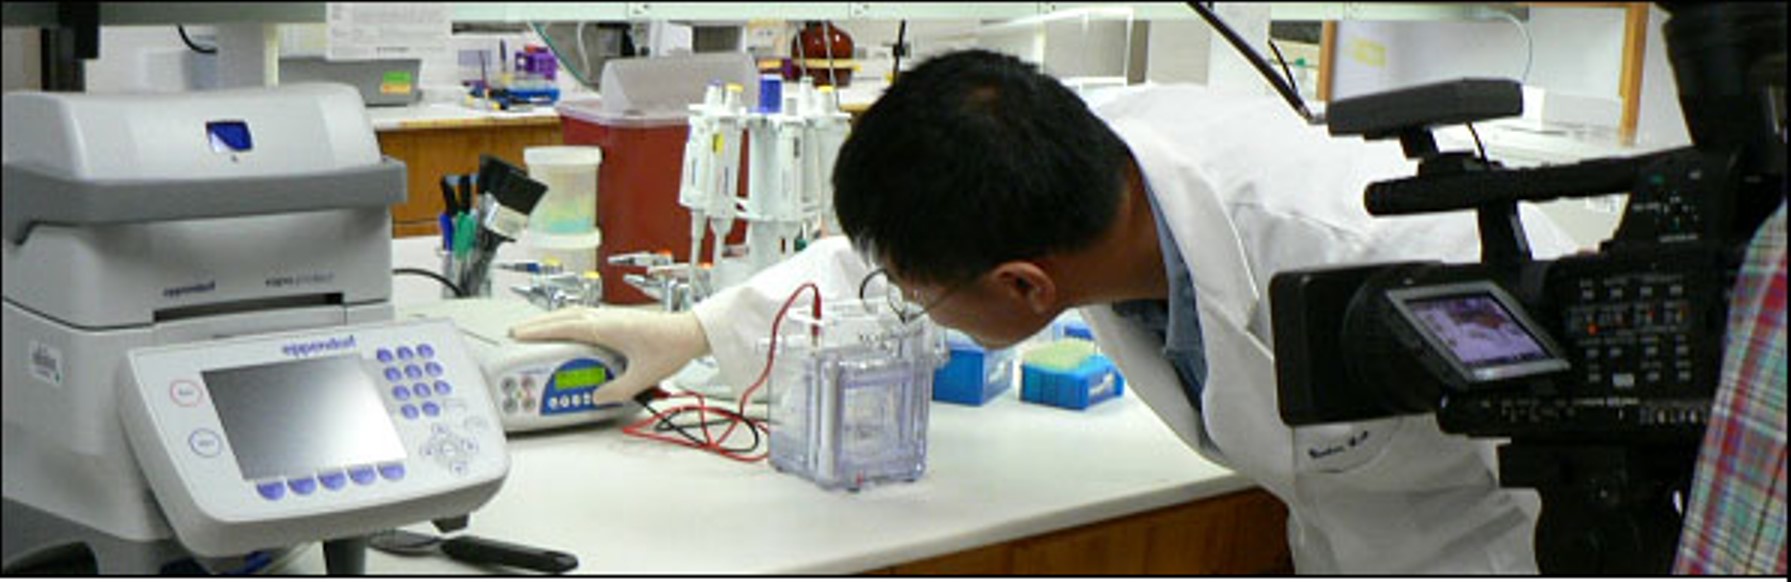 Dr. Xueyou Hu demonstrating an experiment in front of a camera for publication of a video-article in J. Vis. Exp. in 2010